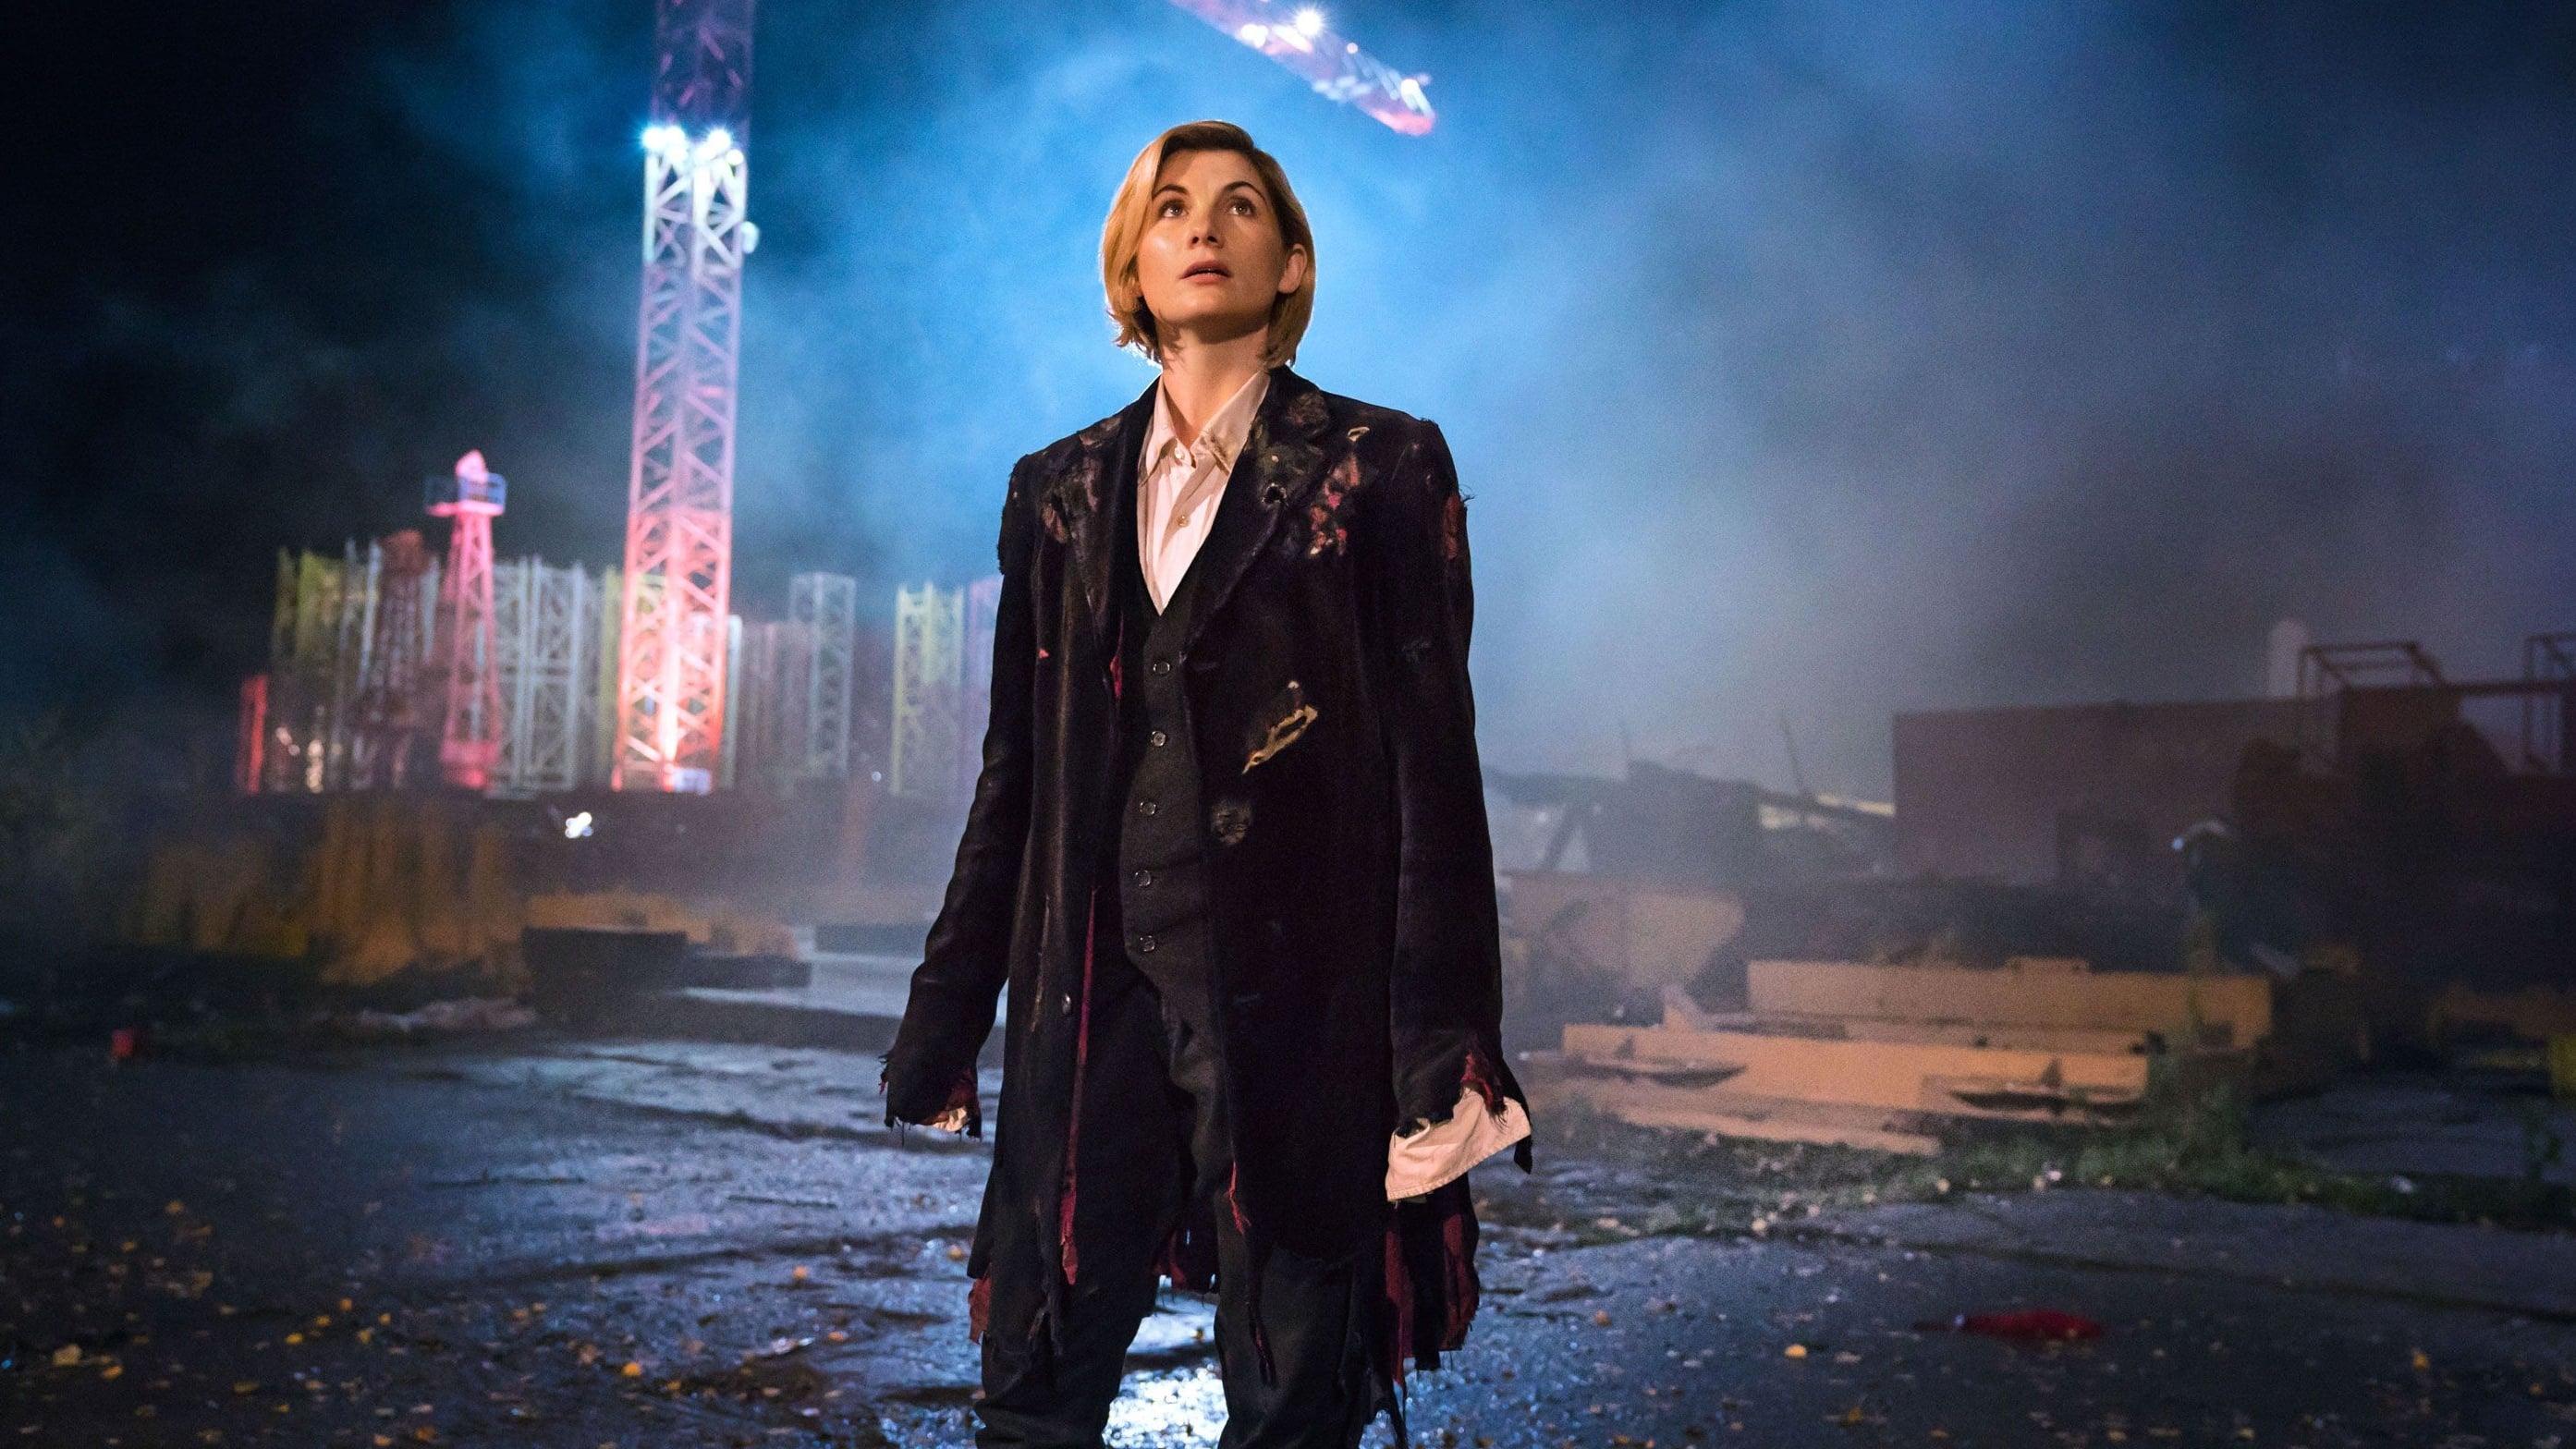 Doctor Who: The Woman Who Fell to Earth backdrop